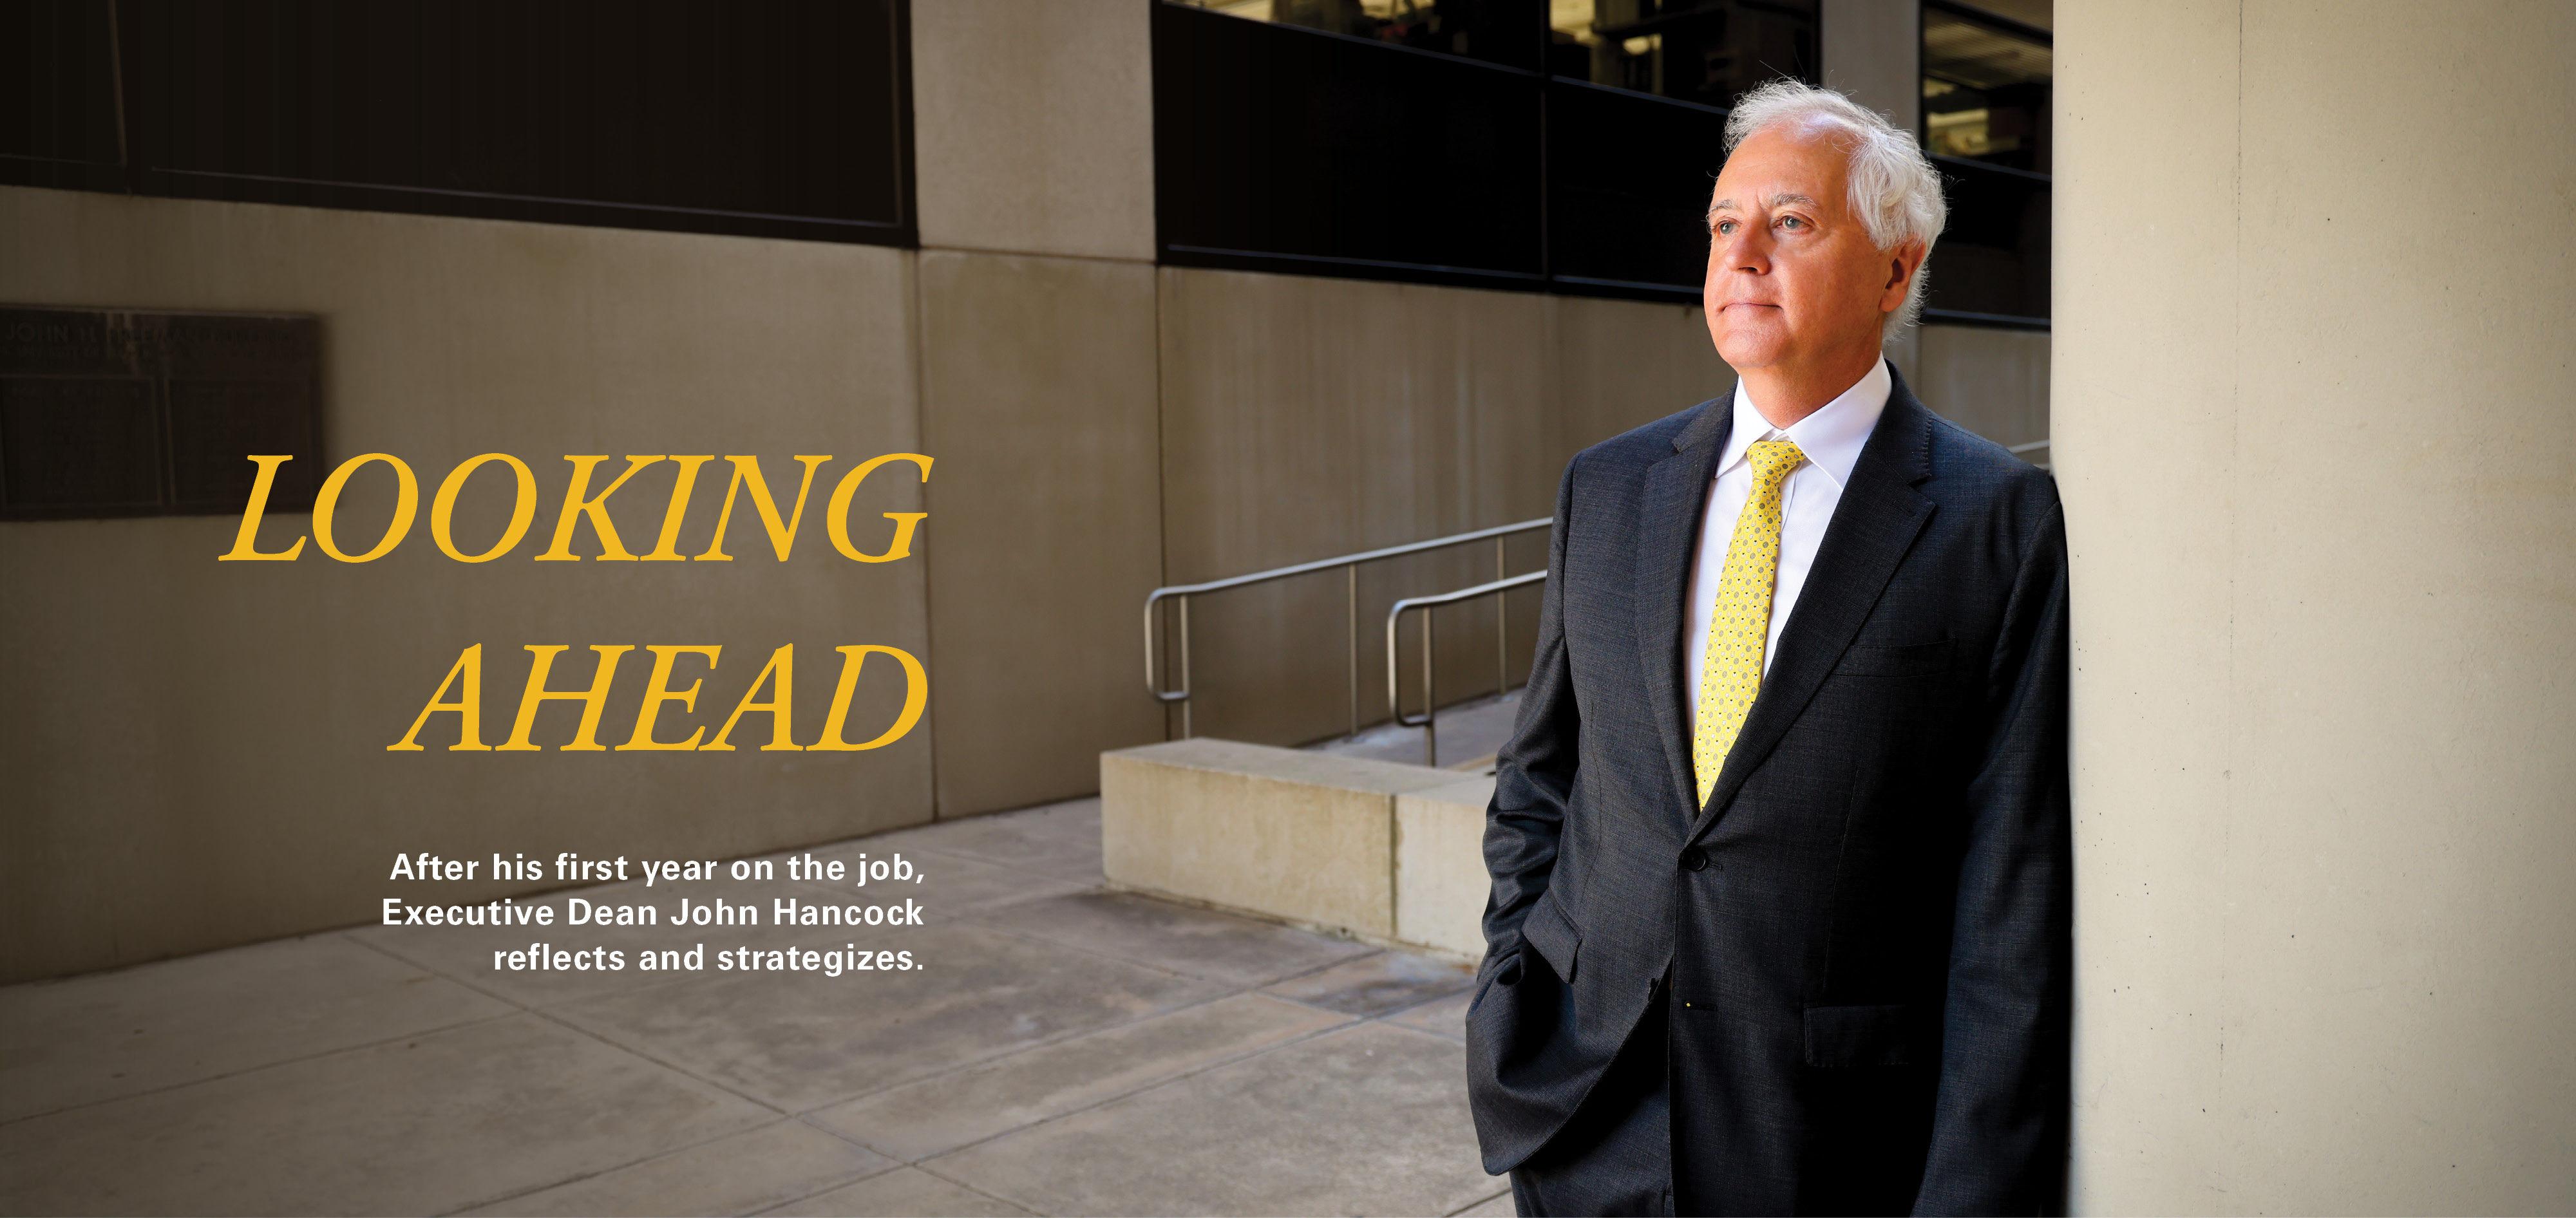 Looking Ahead: After his first year on the job, Executive Dean John Hancock reflects and strategizes.